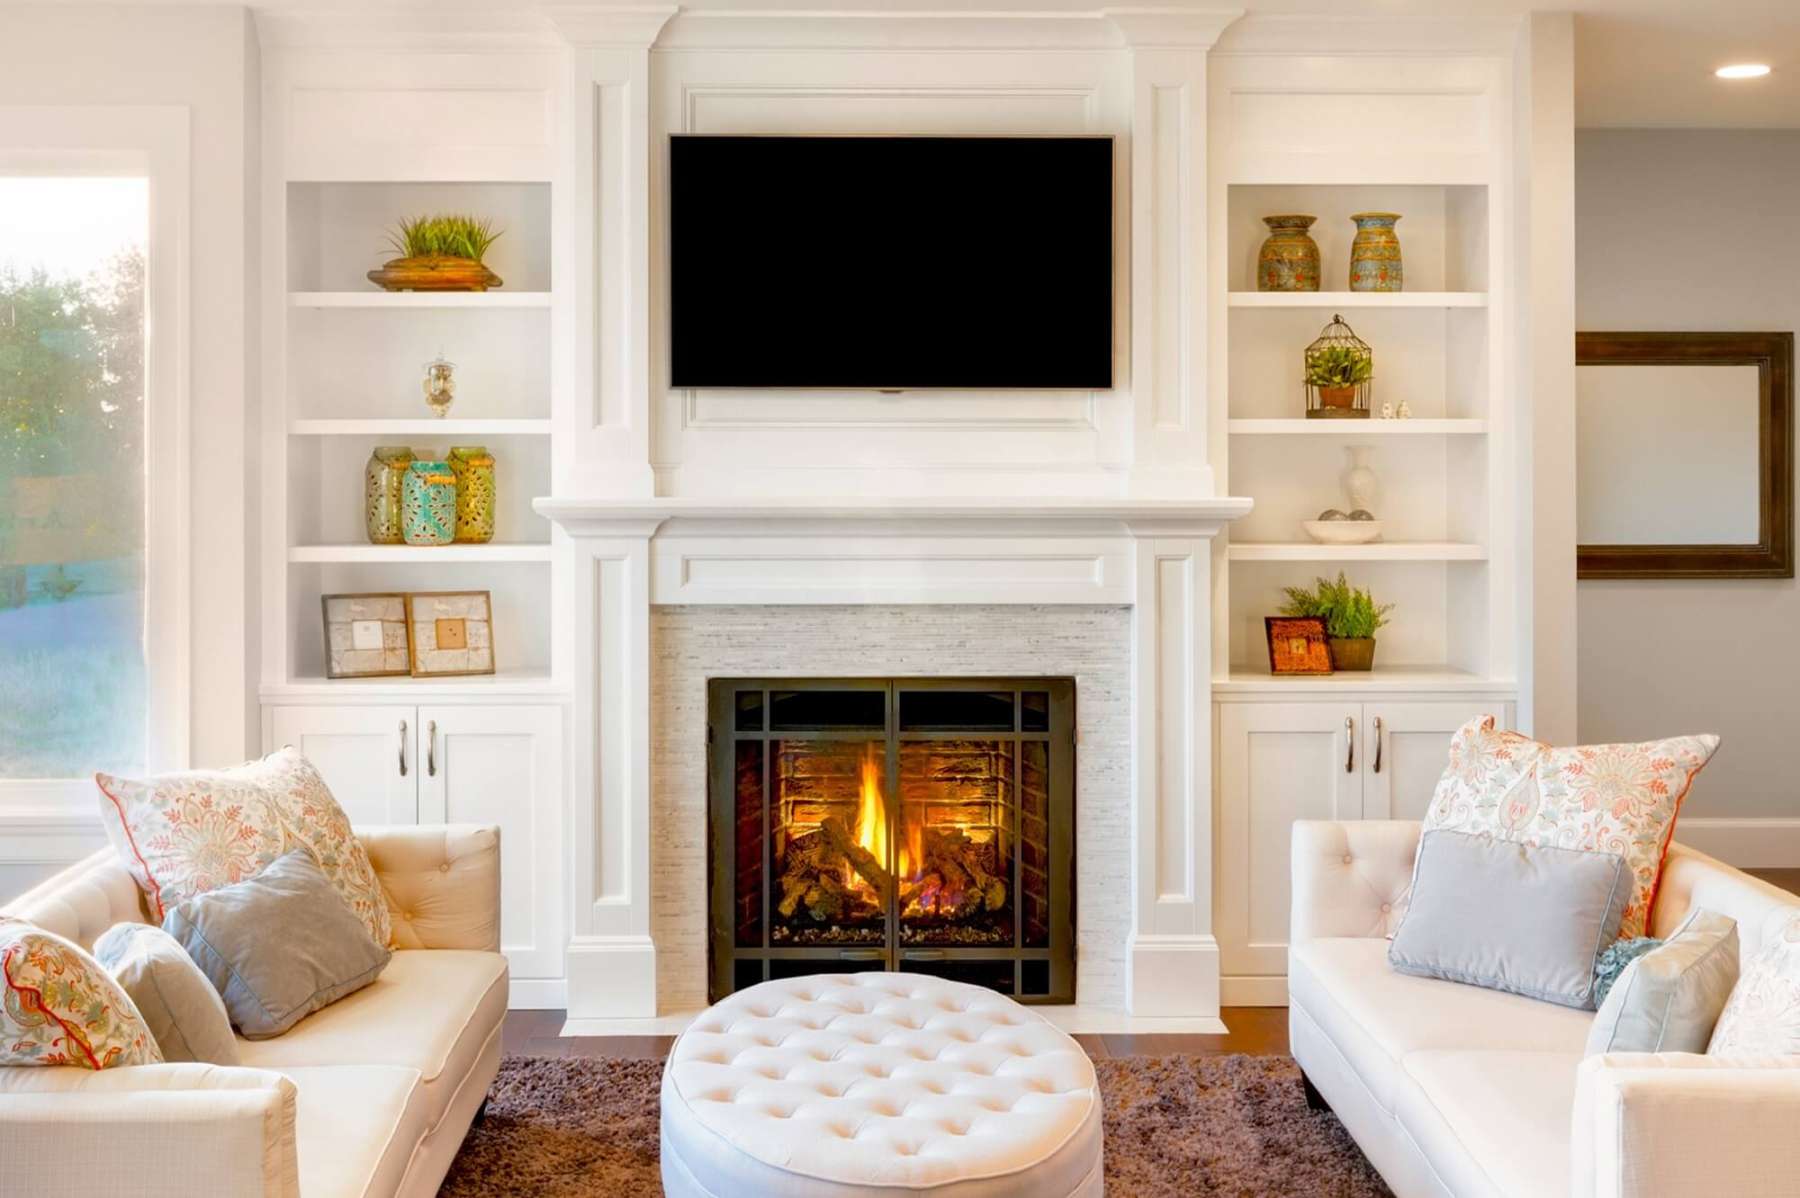 Gorgeous Ideas For Built-Ins Around a Fireplace - Brick-Anew